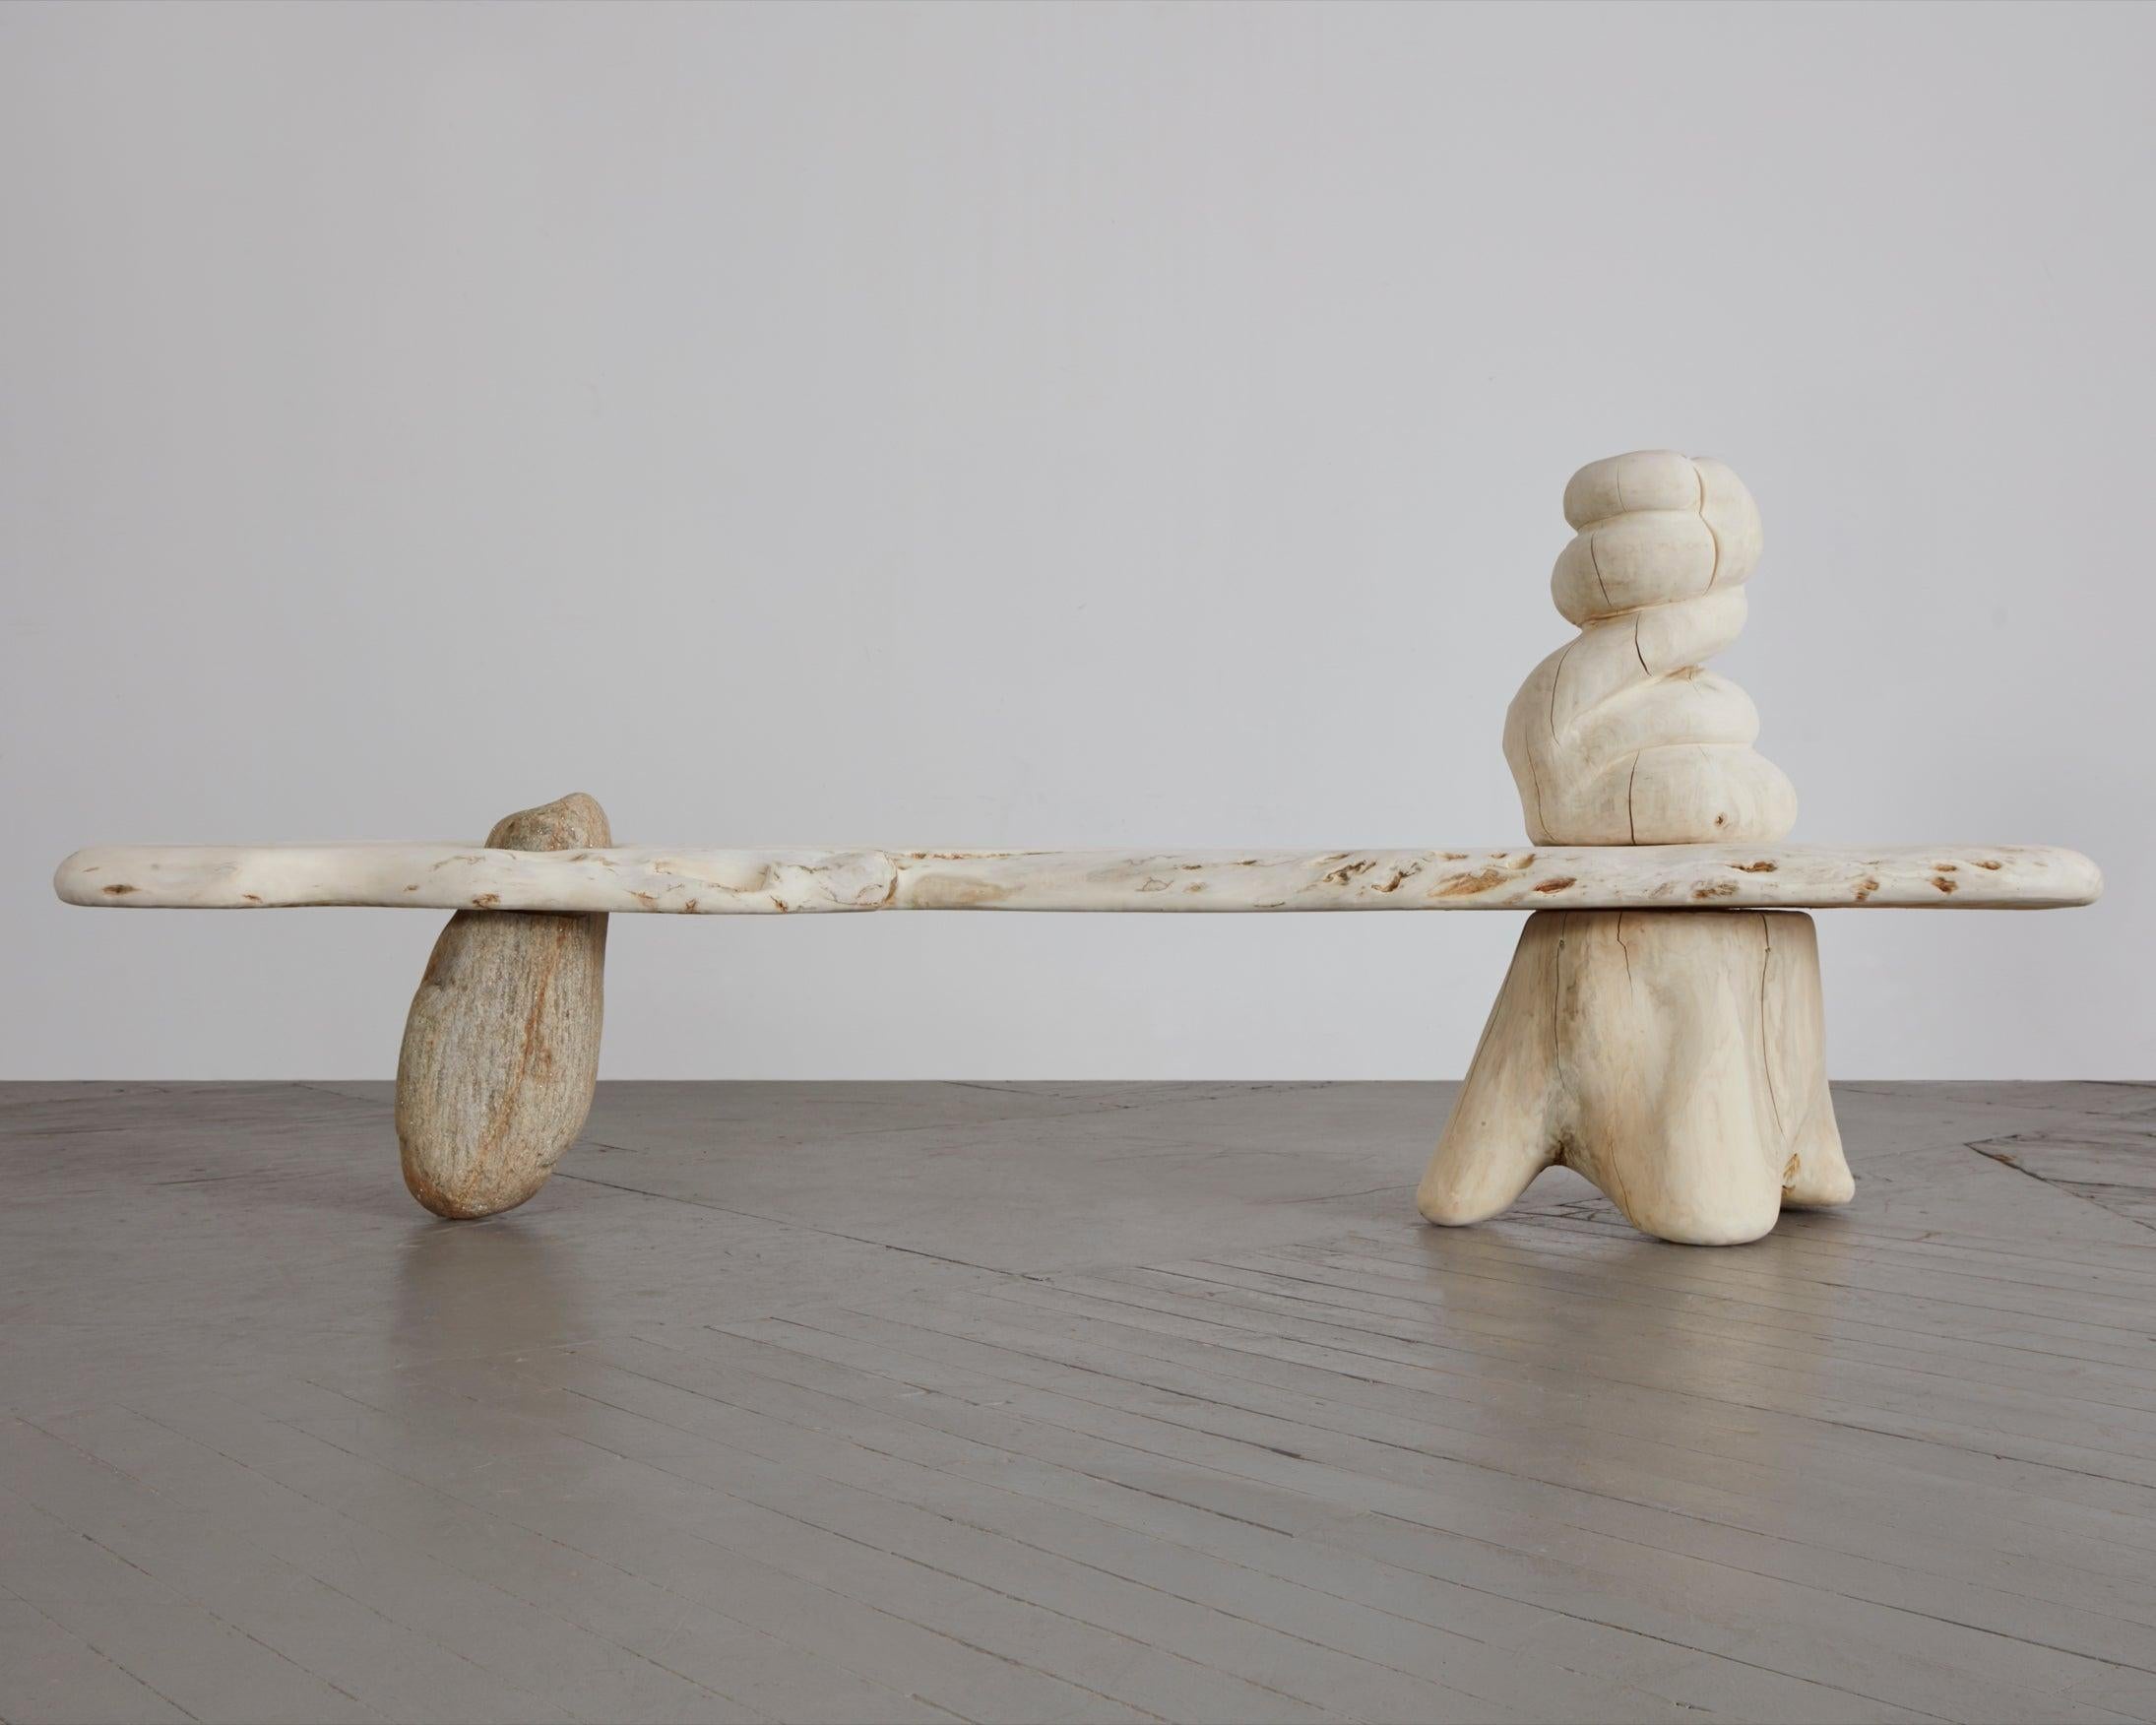 Unique sculptural bench in bleached maple and stone. Designed and made by Rogan
Gregory, USA, 2019.